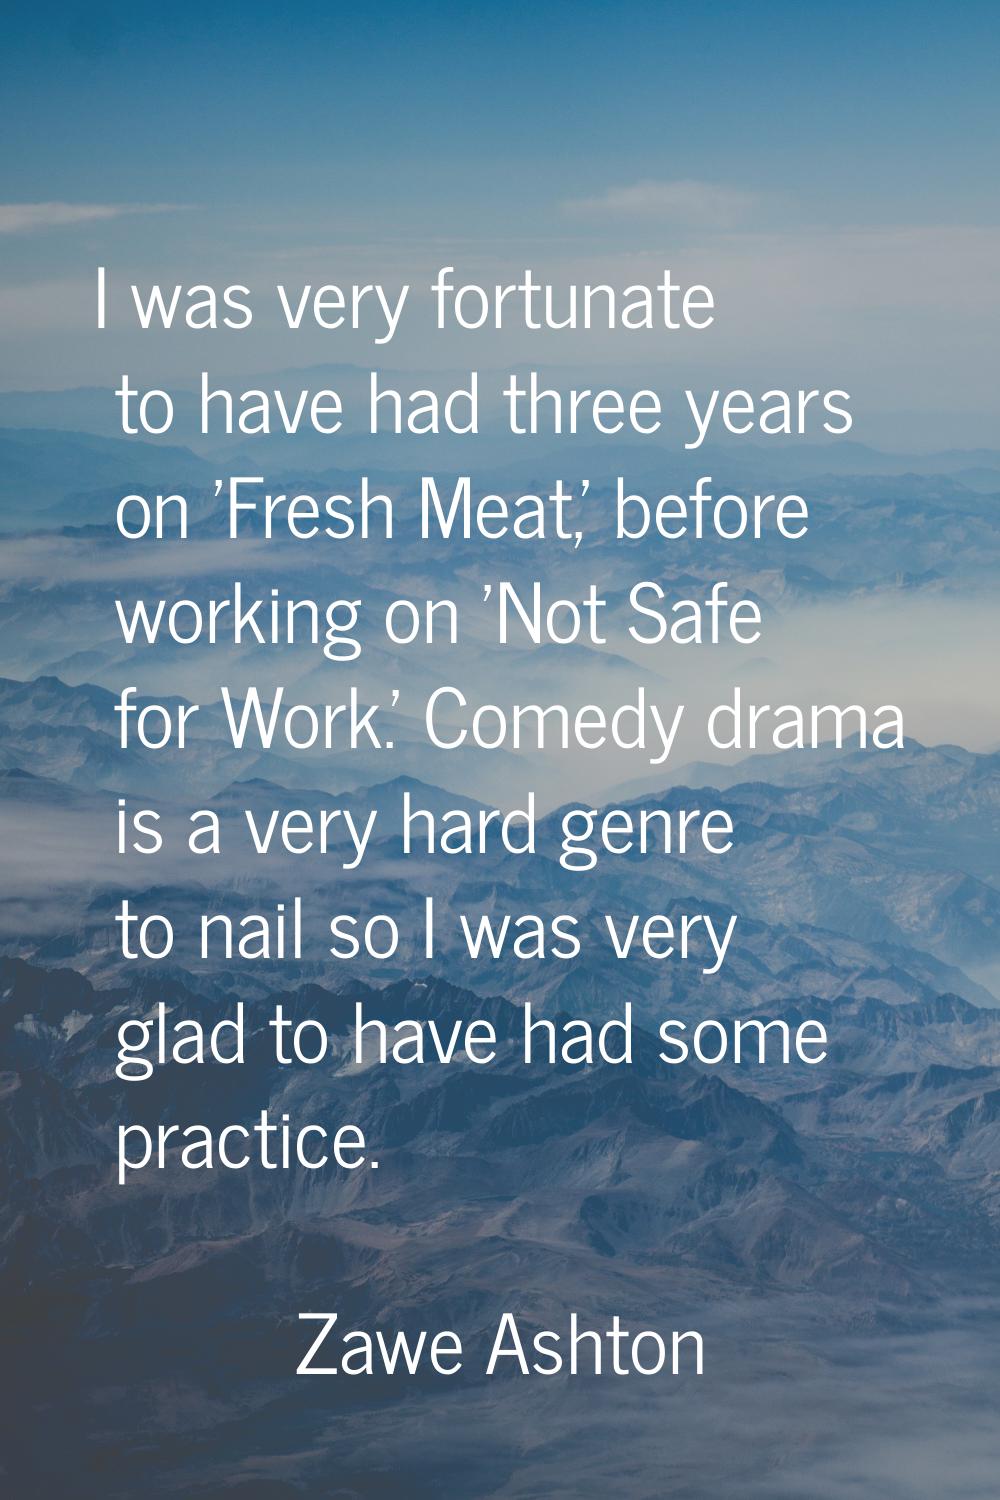 I was very fortunate to have had three years on 'Fresh Meat,' before working on 'Not Safe for Work.